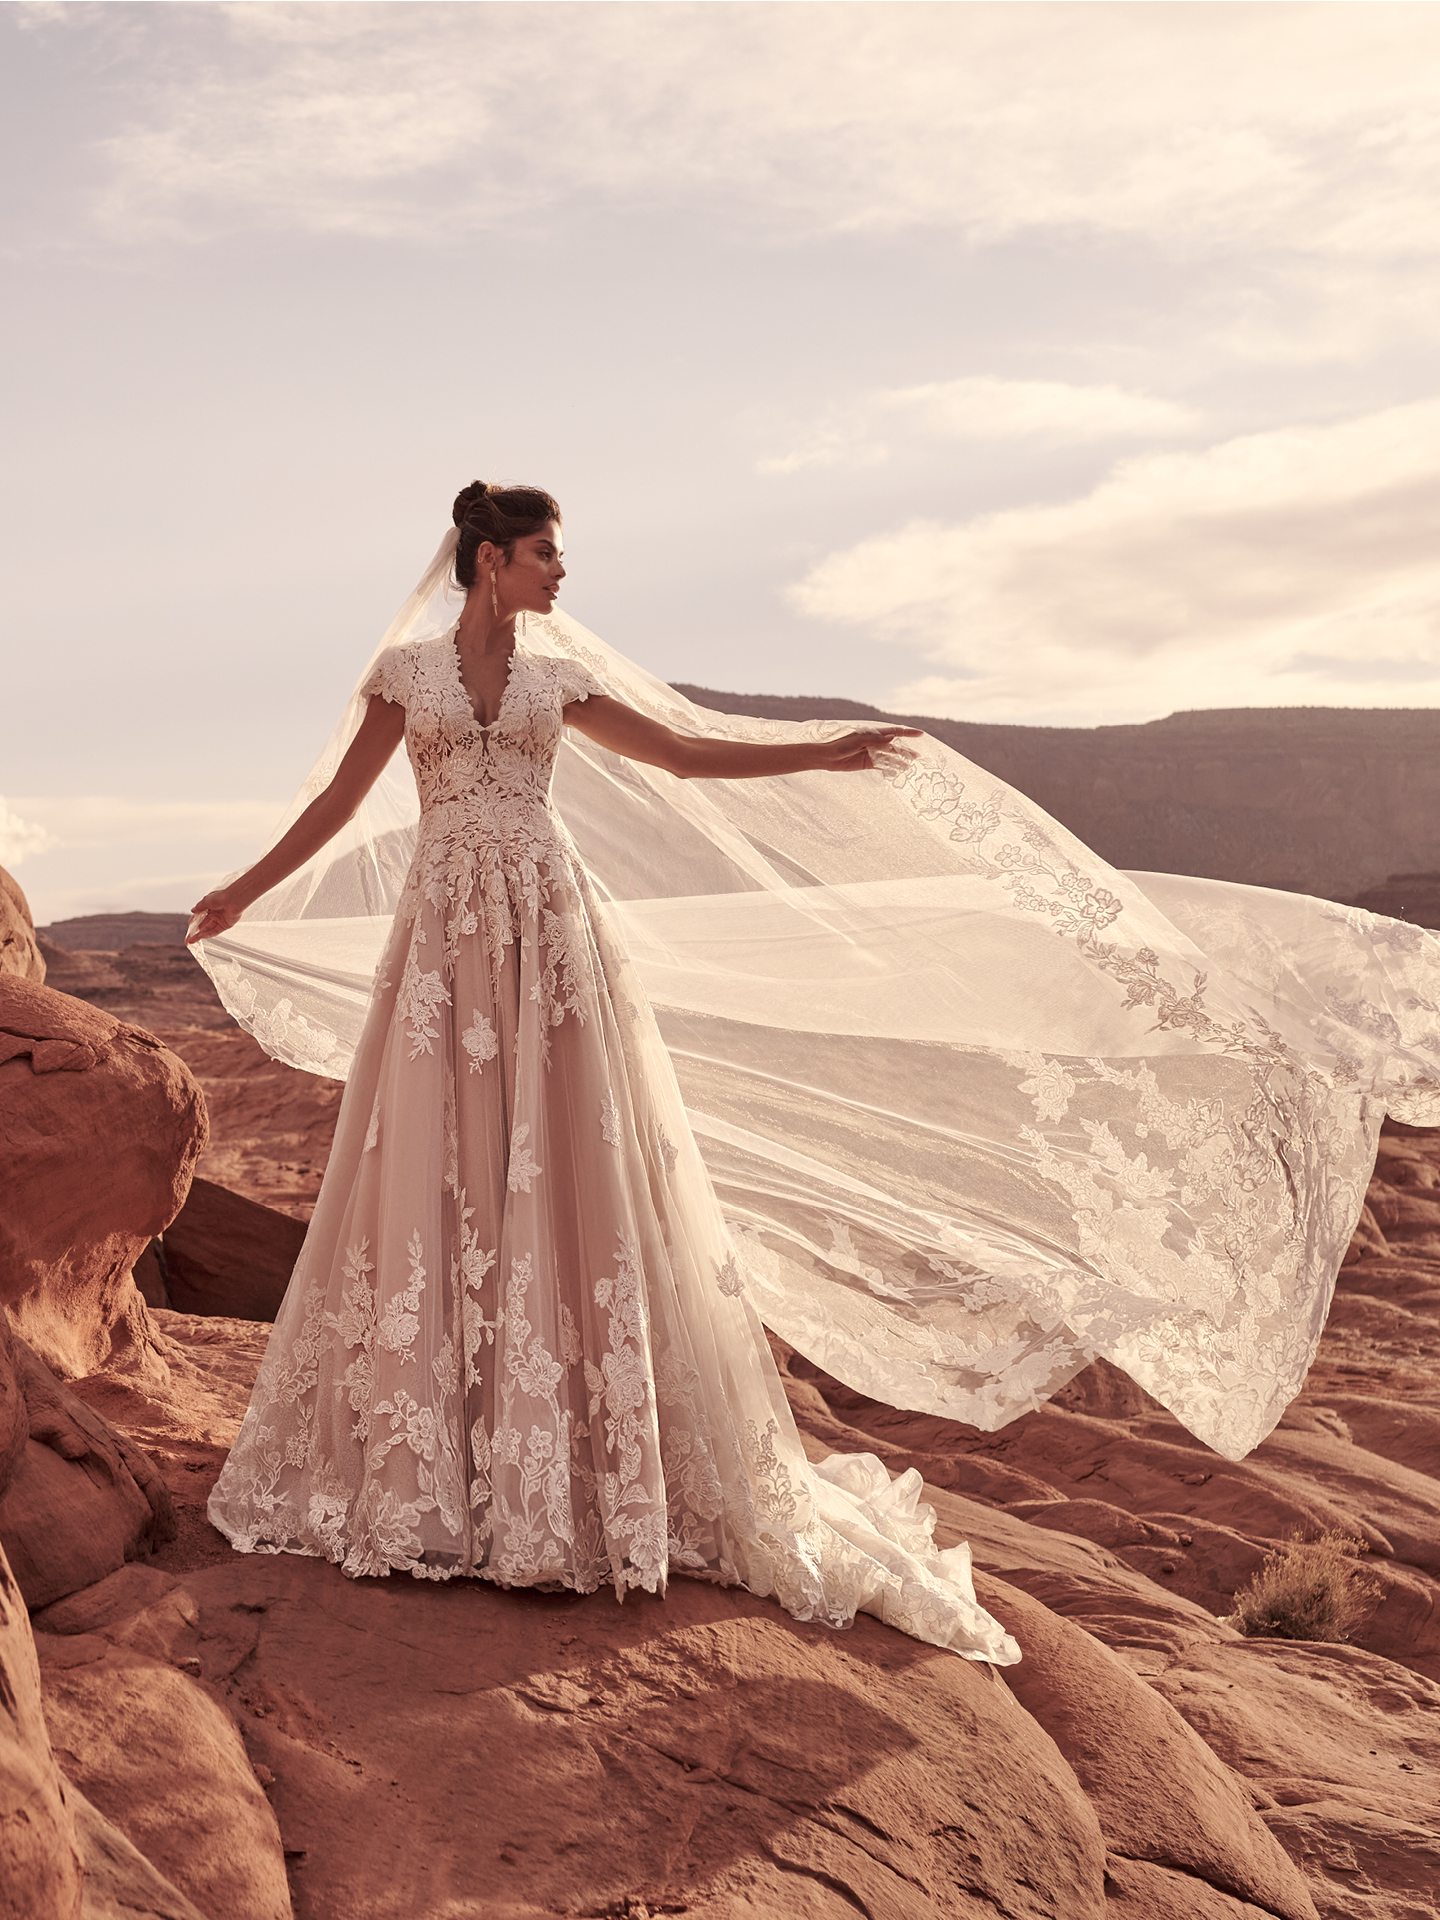 Bride In Lace Princess Wedding Dress Called Kingsley By Sottero And Midgley